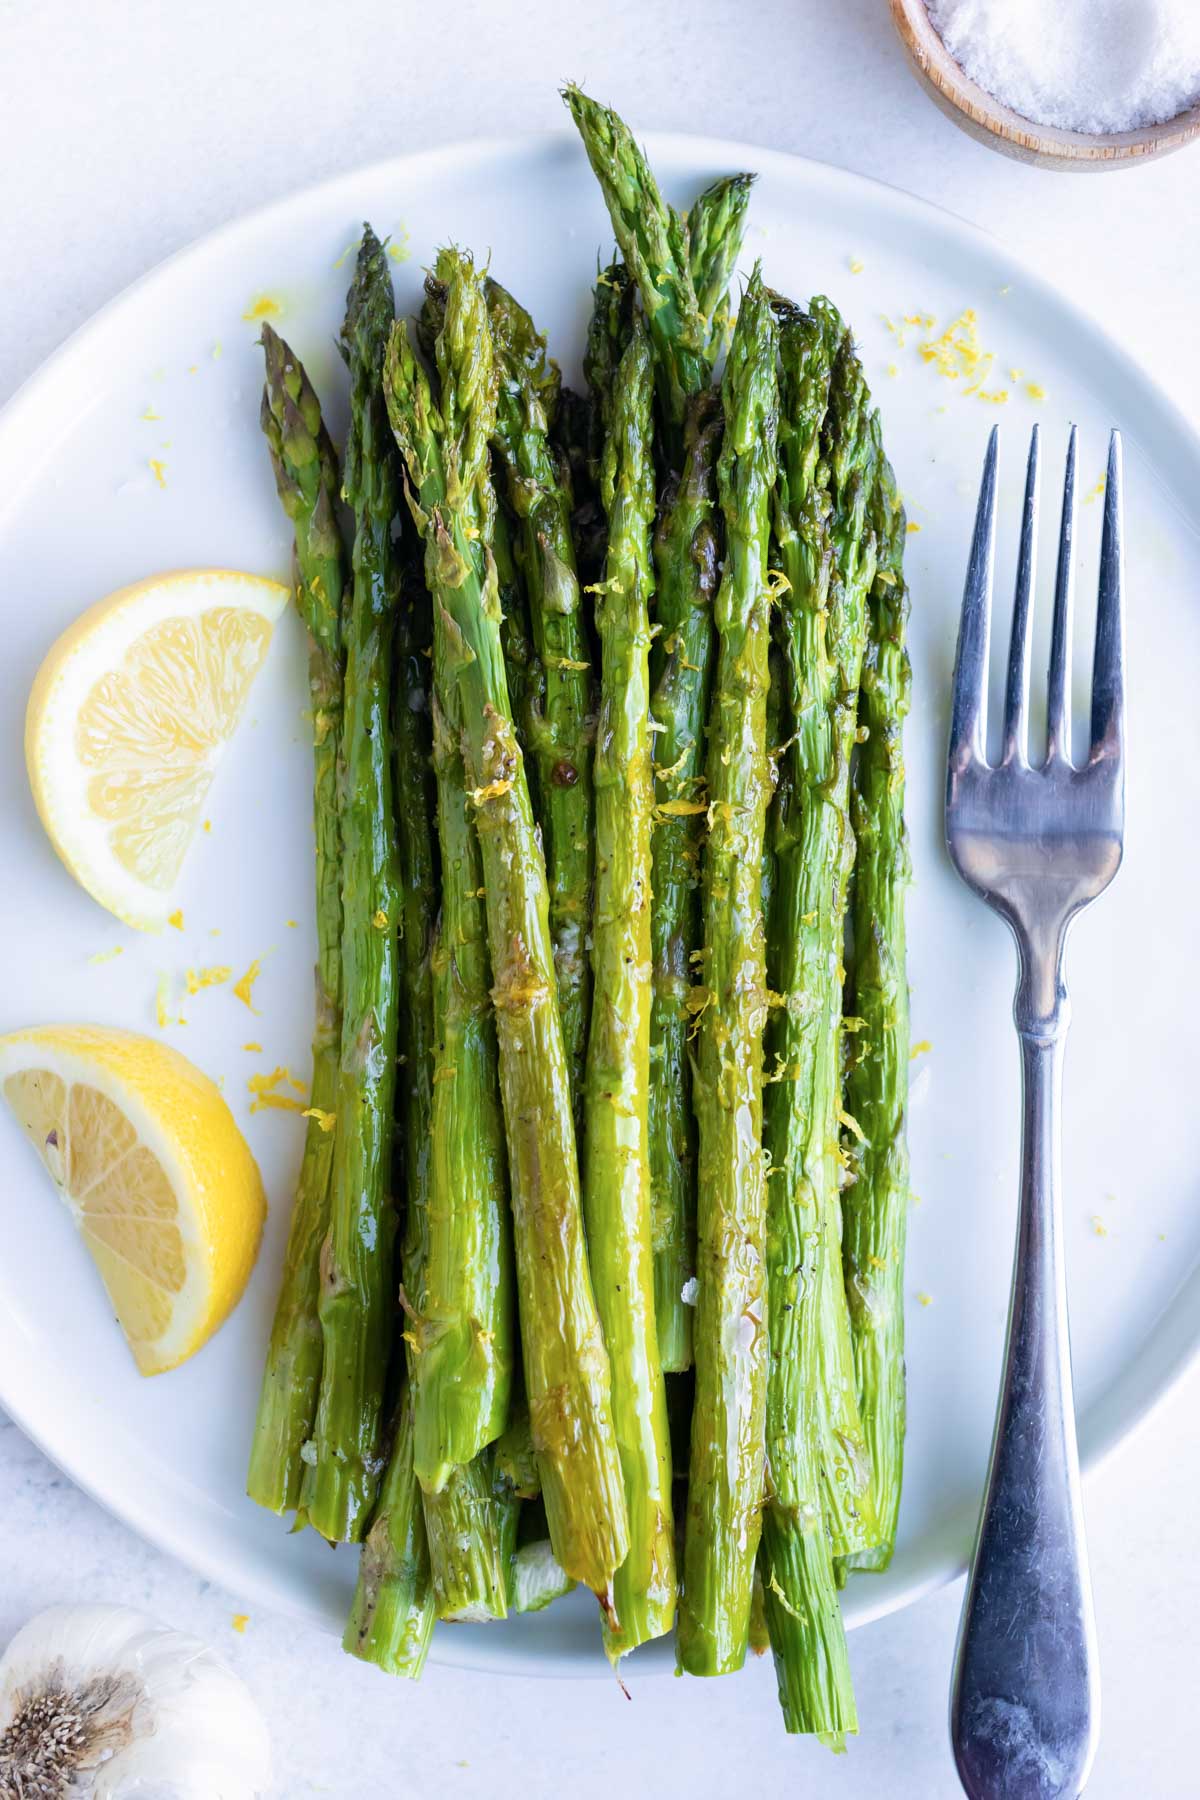 A serving plate full of bright green and tender asparagus spears that were oven-roasted with garlic and lemon juice.